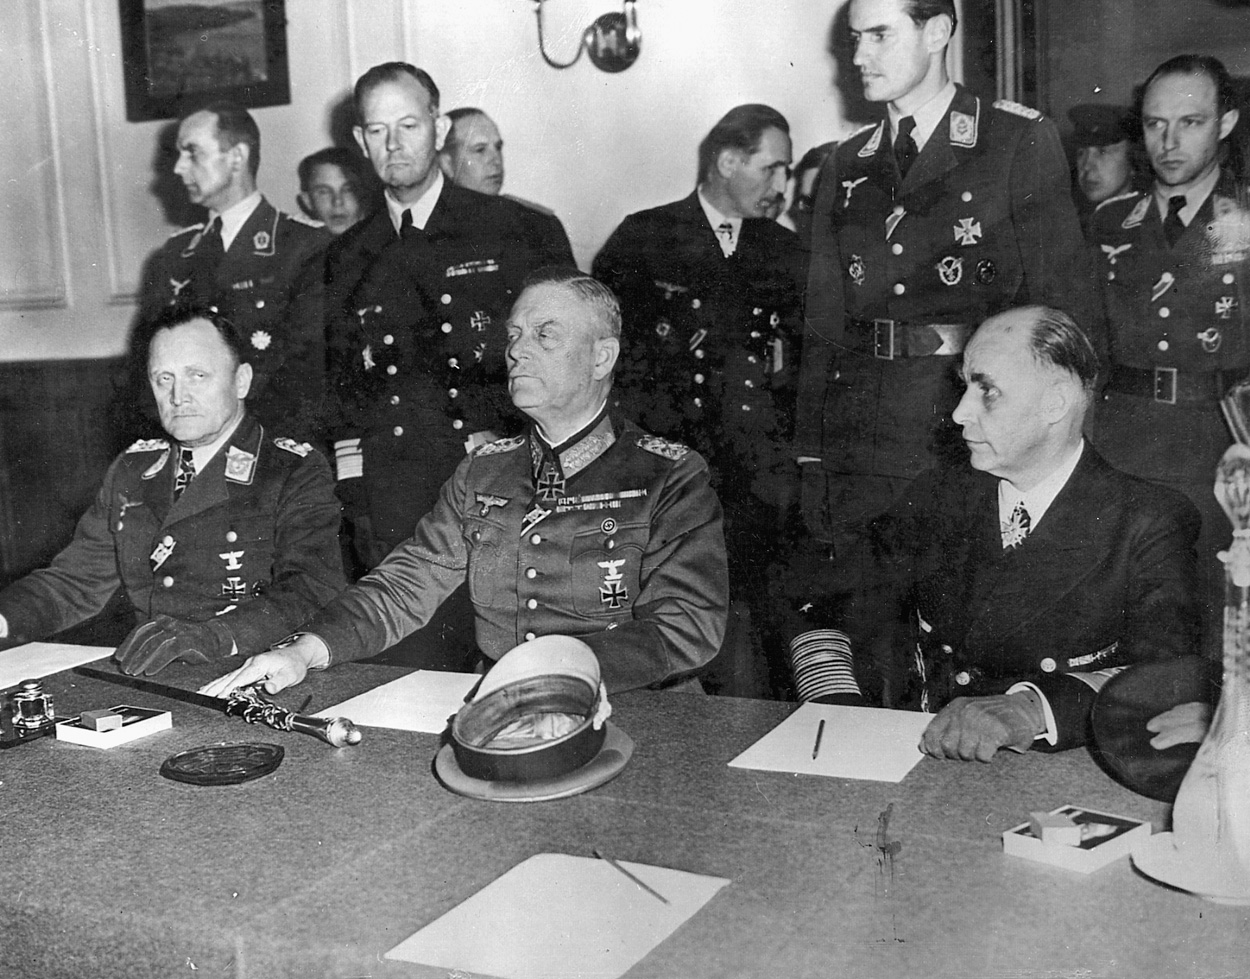 Col. Gen. P.F. Stampf and Field Marshal Wilhelm Keitel sign surrender papers at Russian headquarters in Berlin.